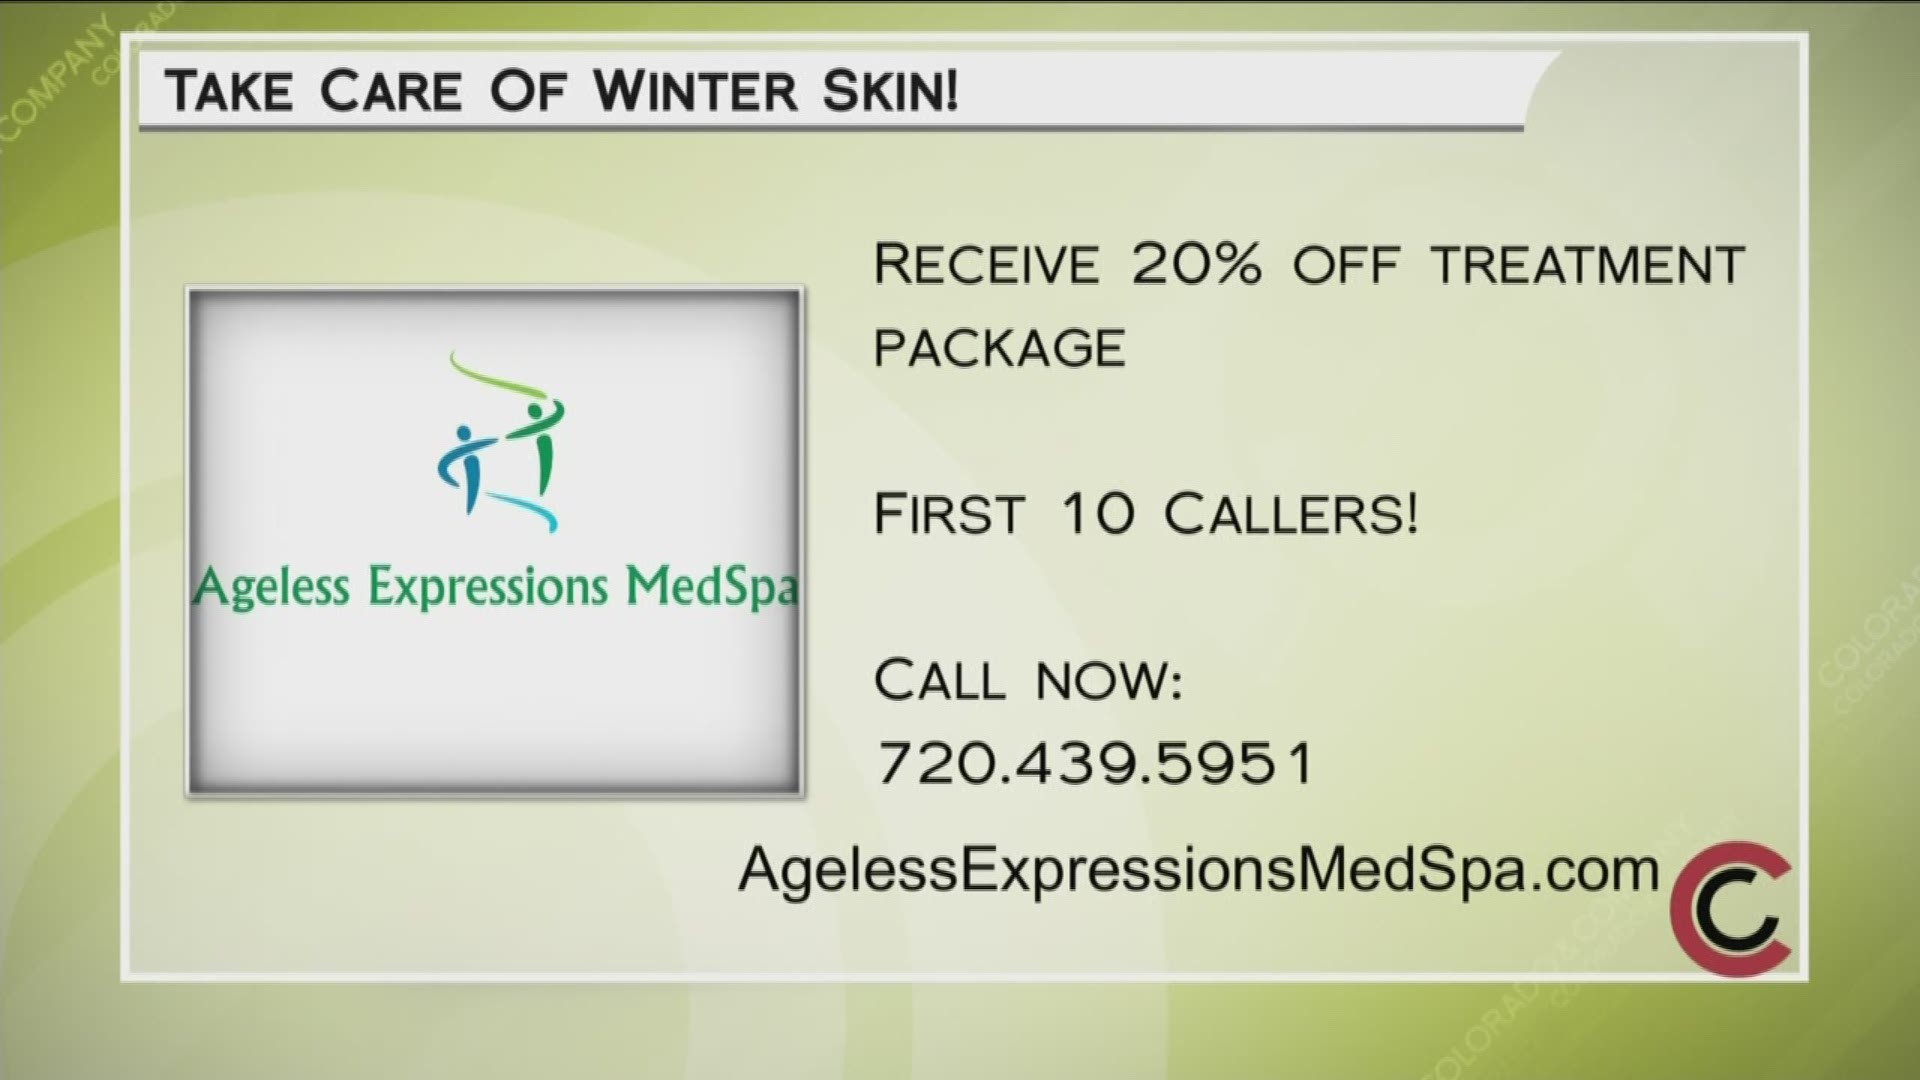 Call 720.439.5951 to book your free consultation with Ageless Expressions MedSpa. Learn more about what they can help you with at AgelessExpressiosMedSpa.com.